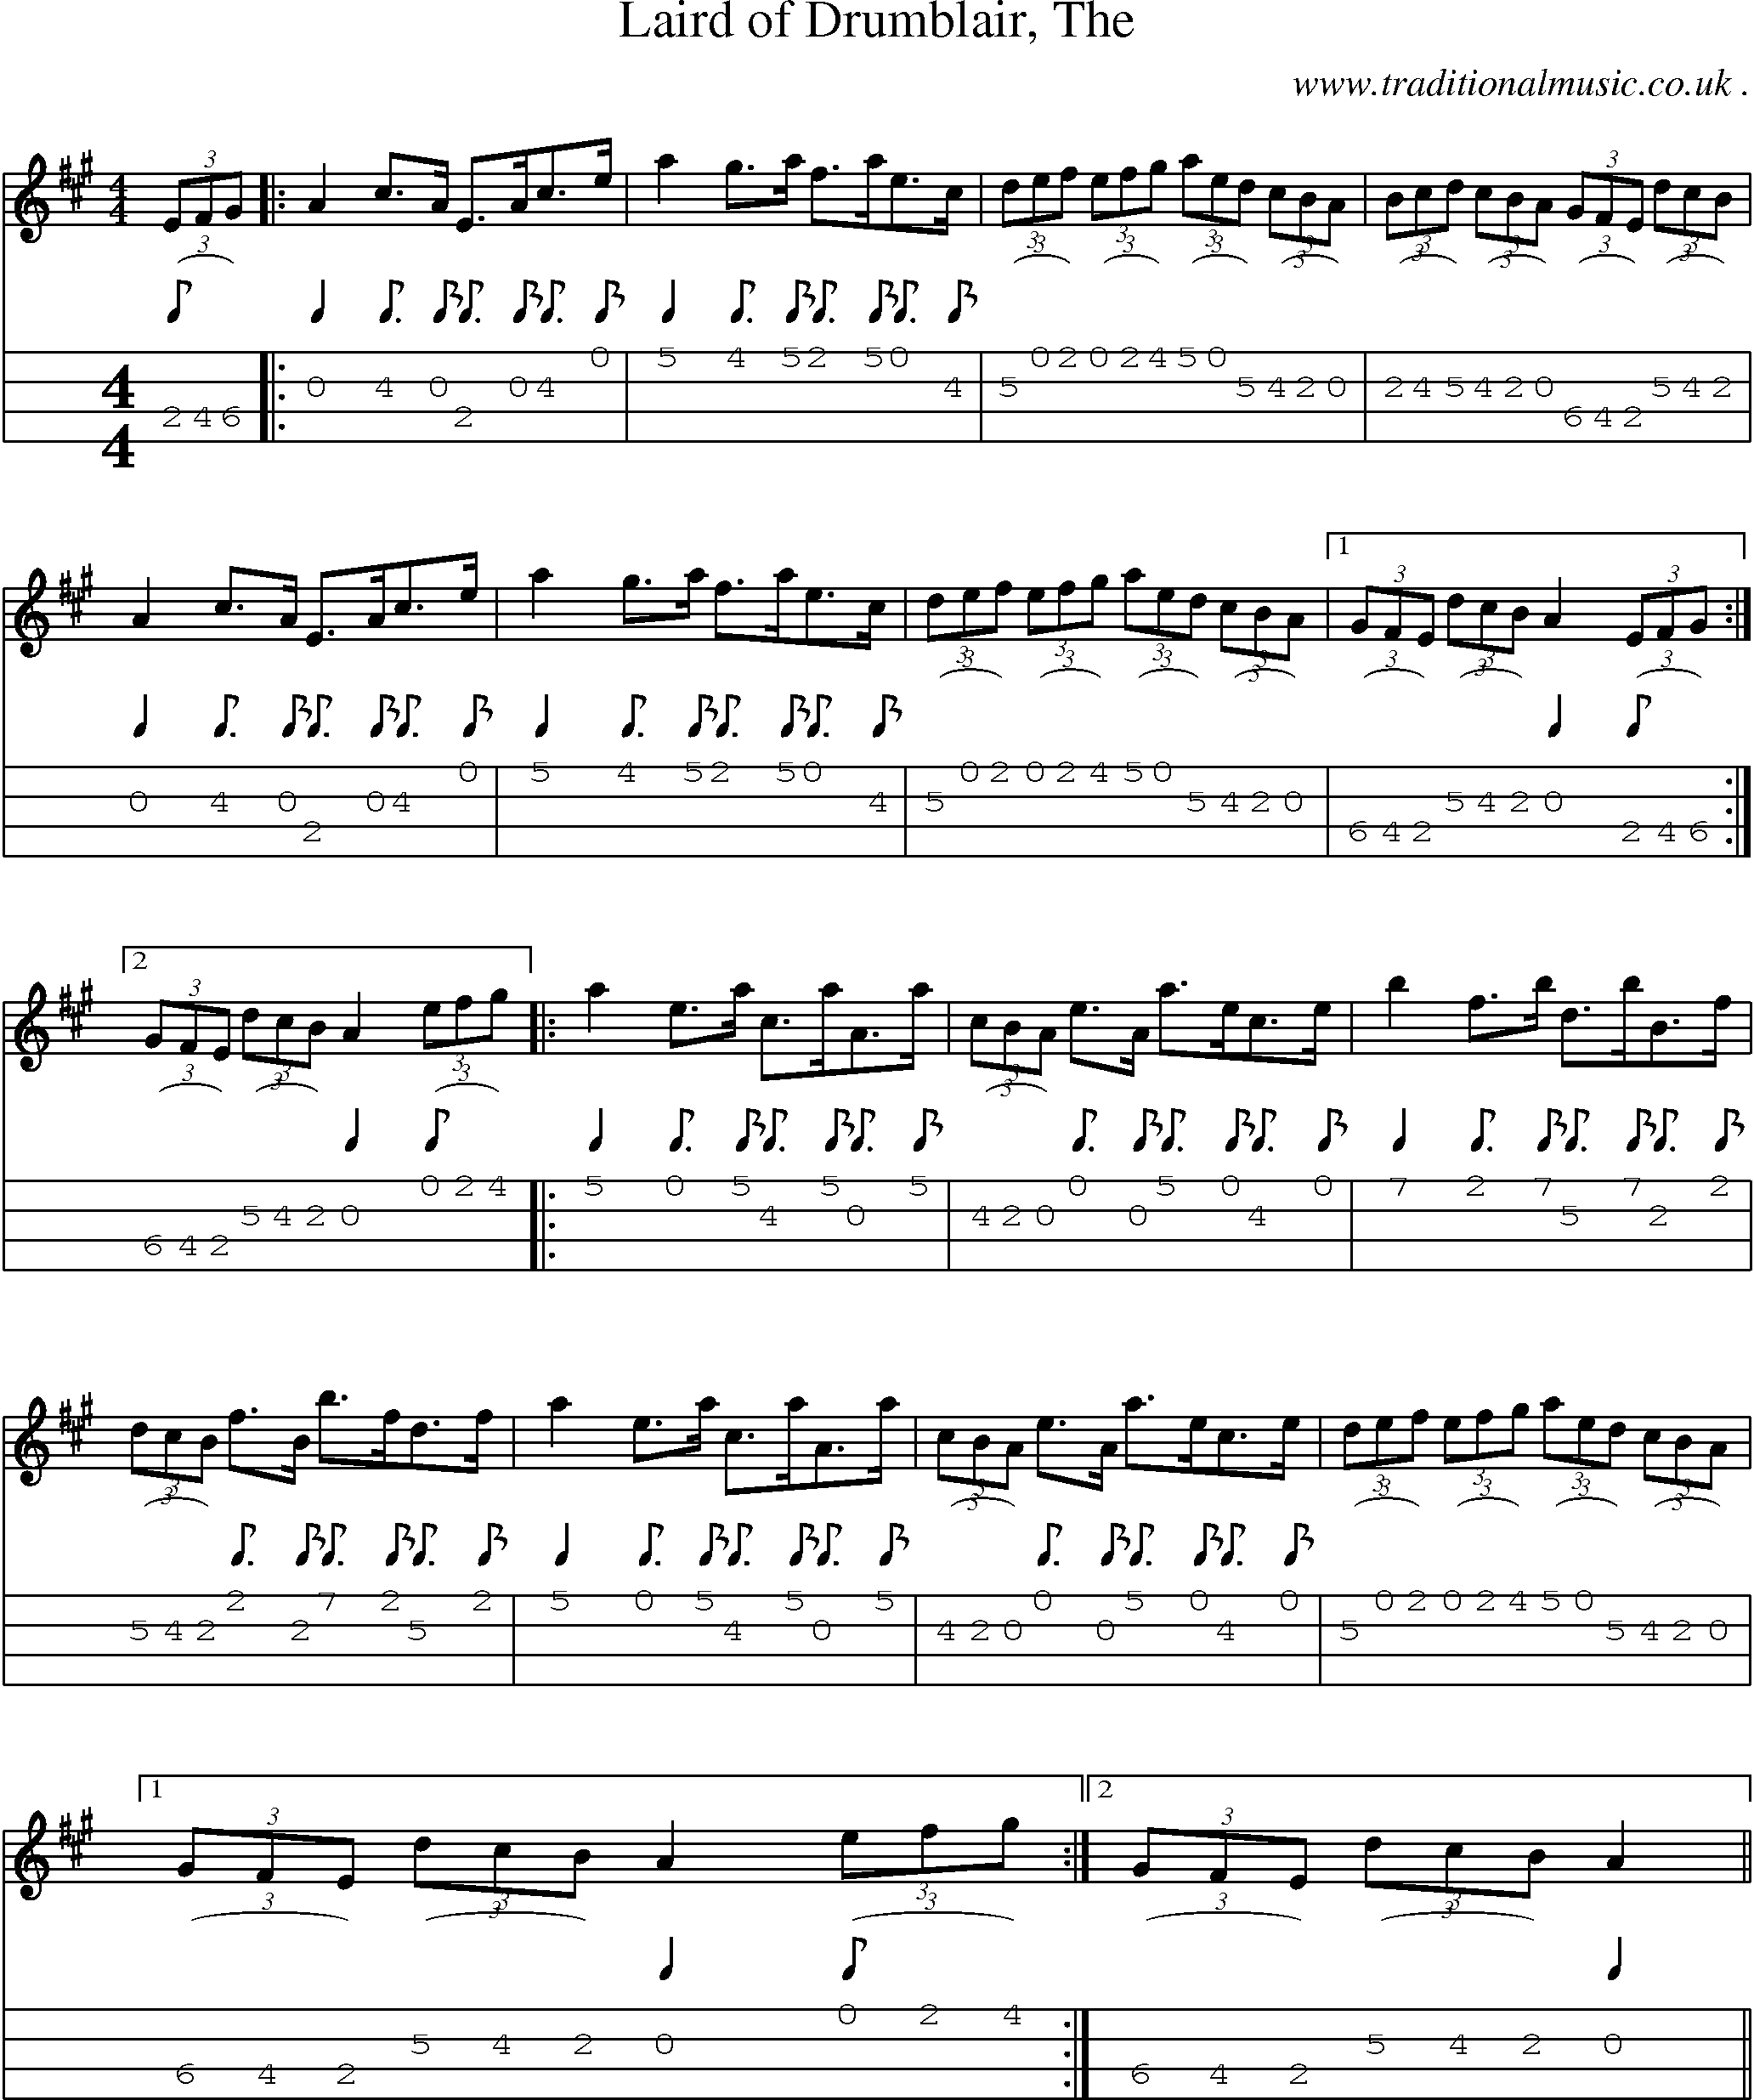 Sheet-music  score, Chords and Mandolin Tabs for Laird Of Drumblair The